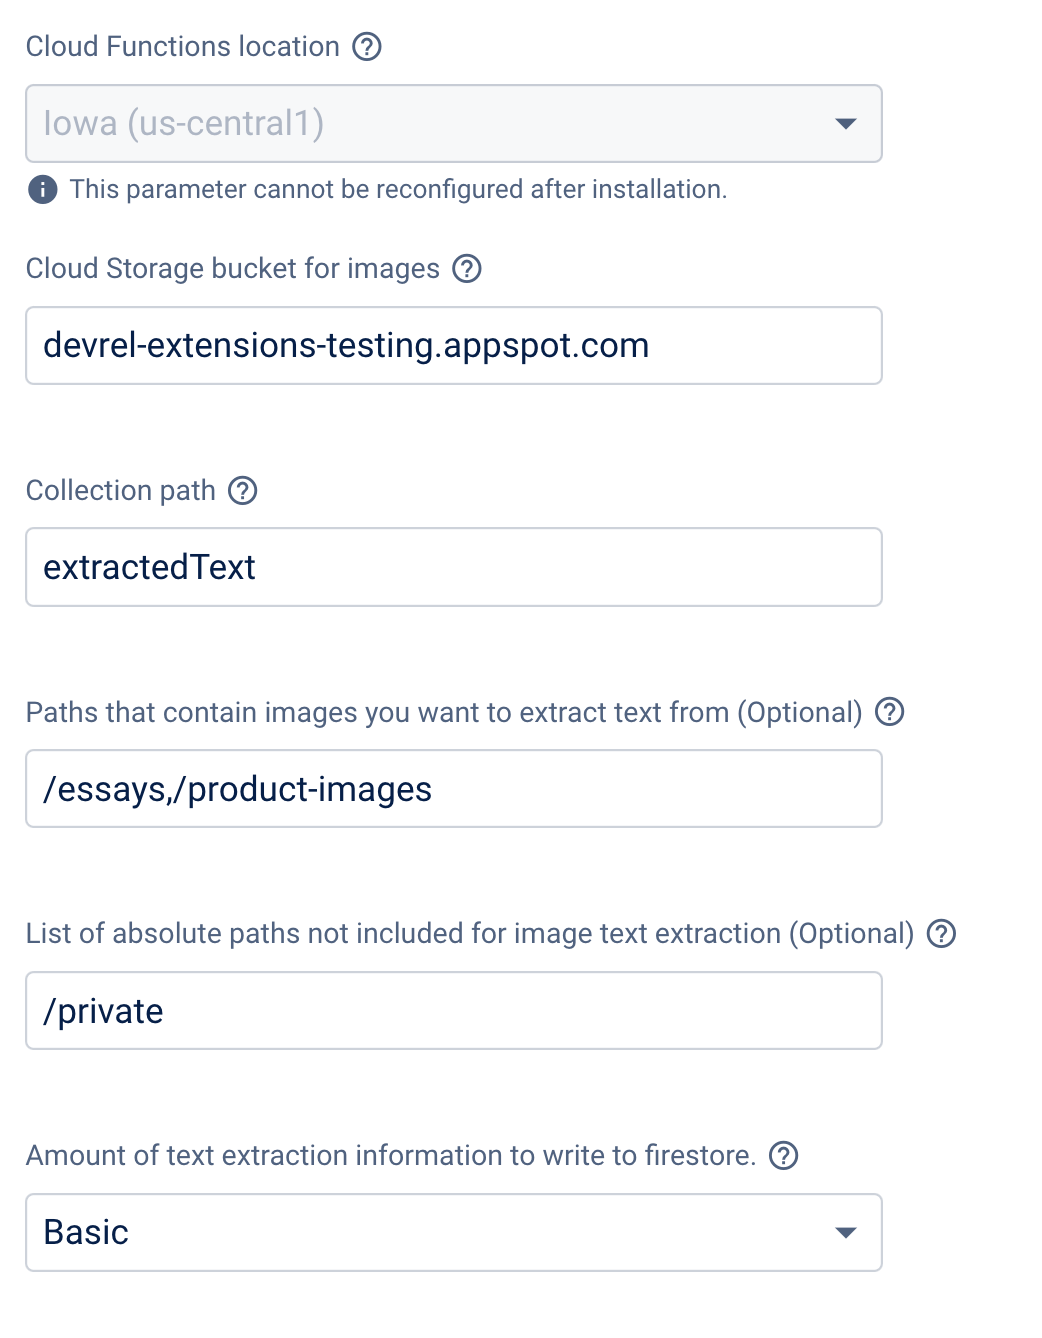 Extract Image Text Extension params